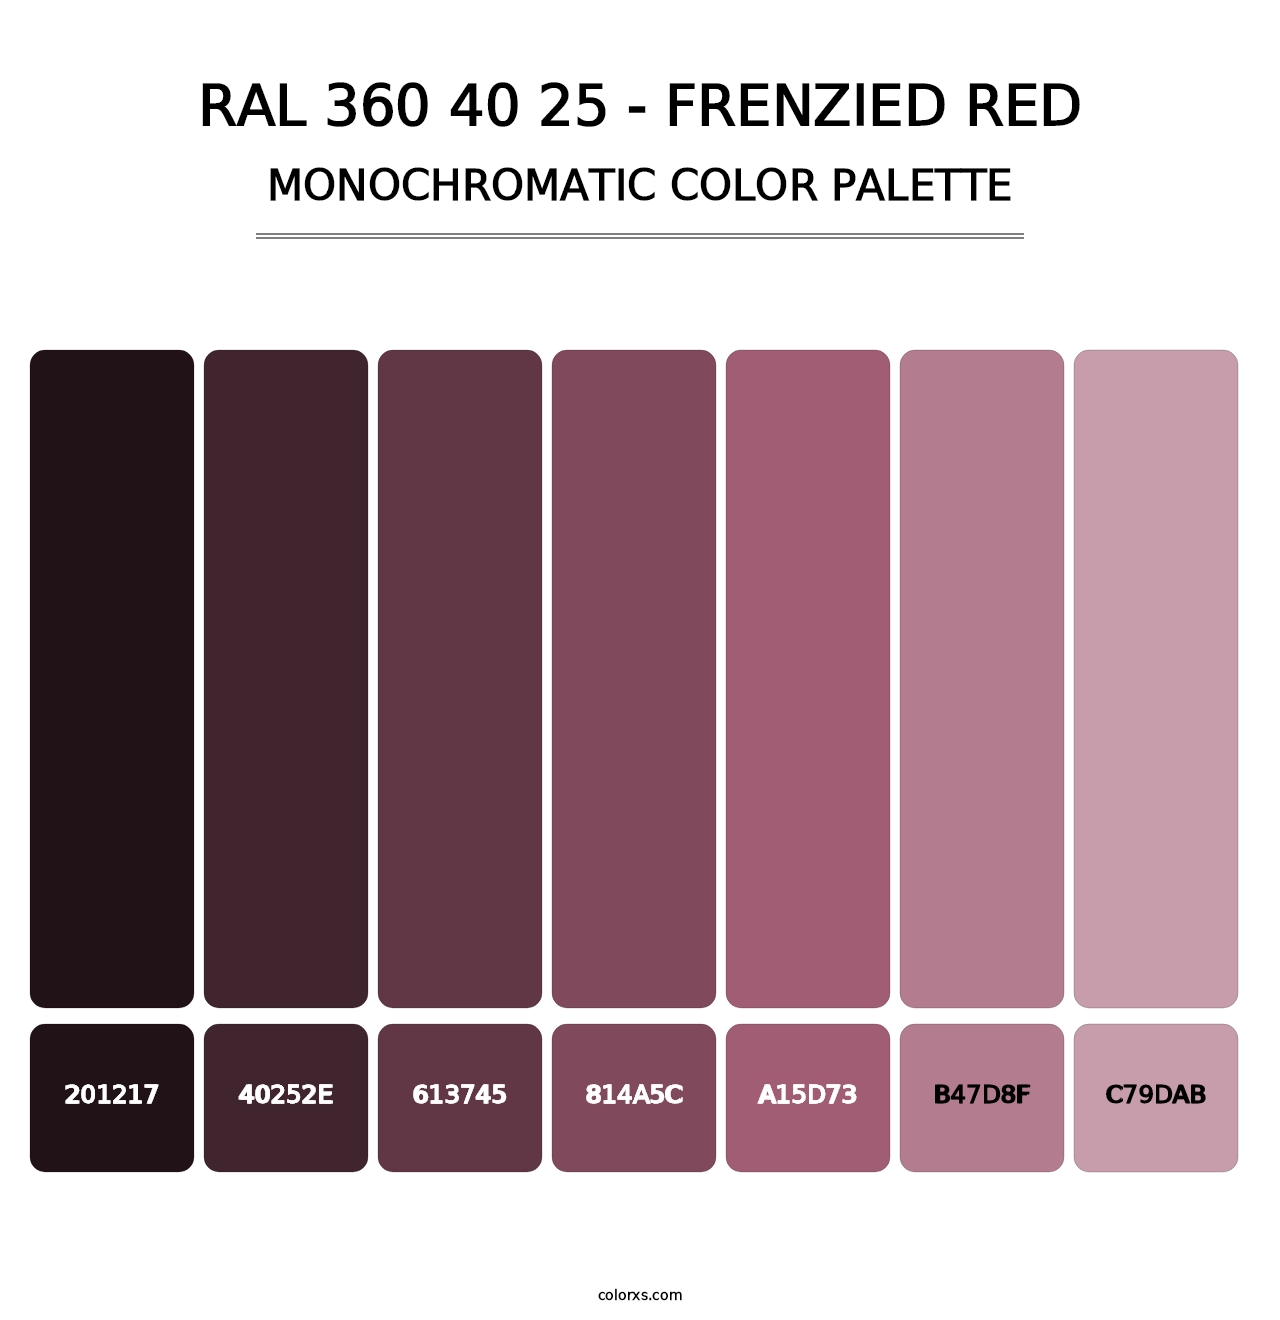 RAL 360 40 25 - Frenzied Red - Monochromatic Color Palette